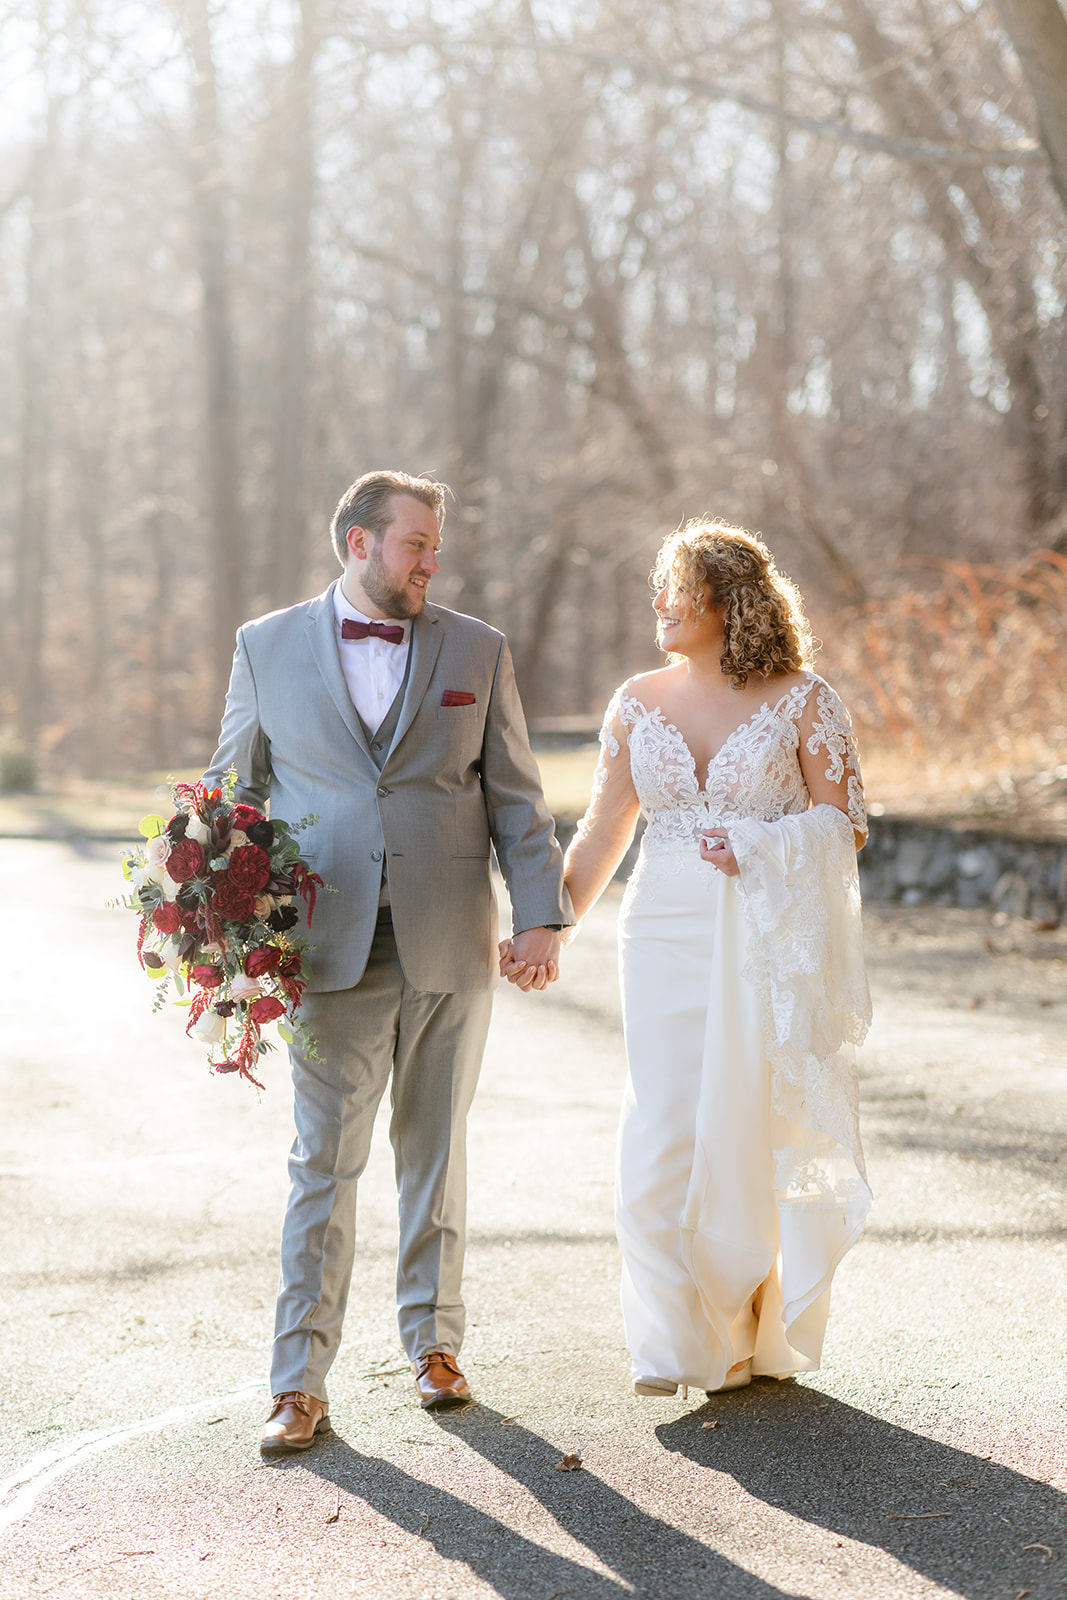 Newlyweds hold hands while the groom carries the large red bouquet and walking up a large sidewalk at sunset